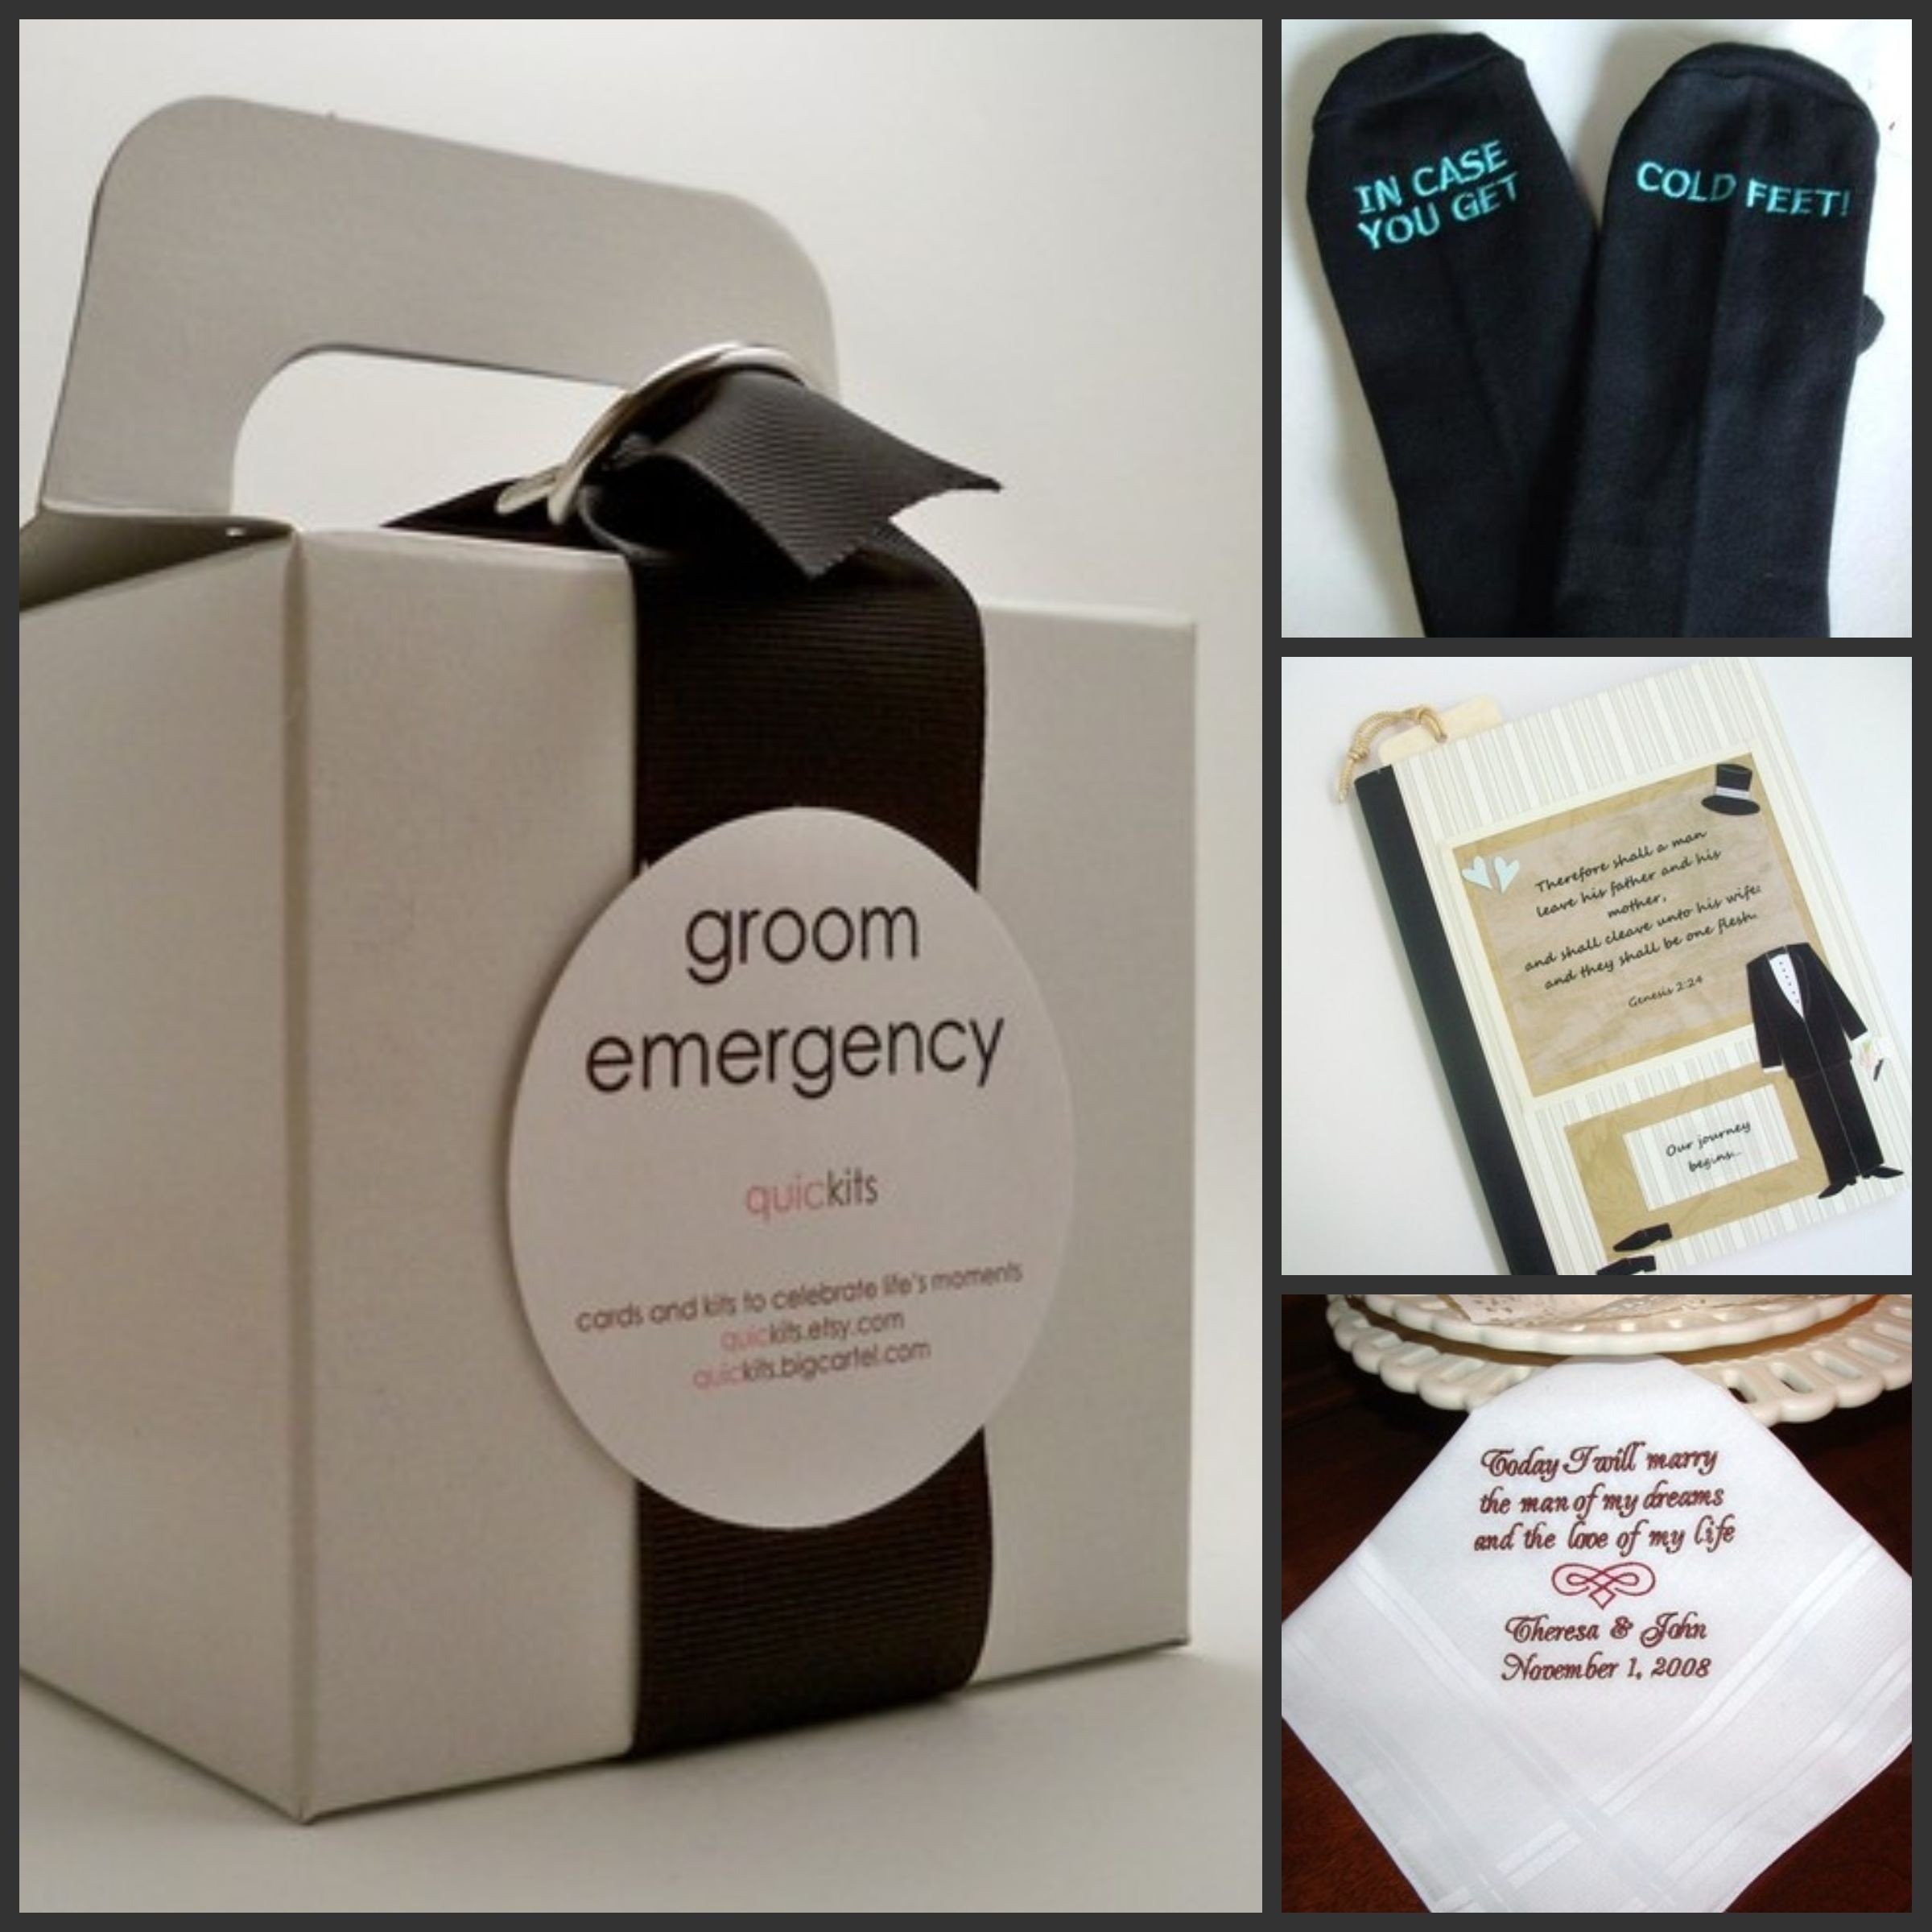 10 Beautiful Gift Ideas From Groom To Bride wedding gift from groom to bride wedding ideas wedding gifts for 4 2022